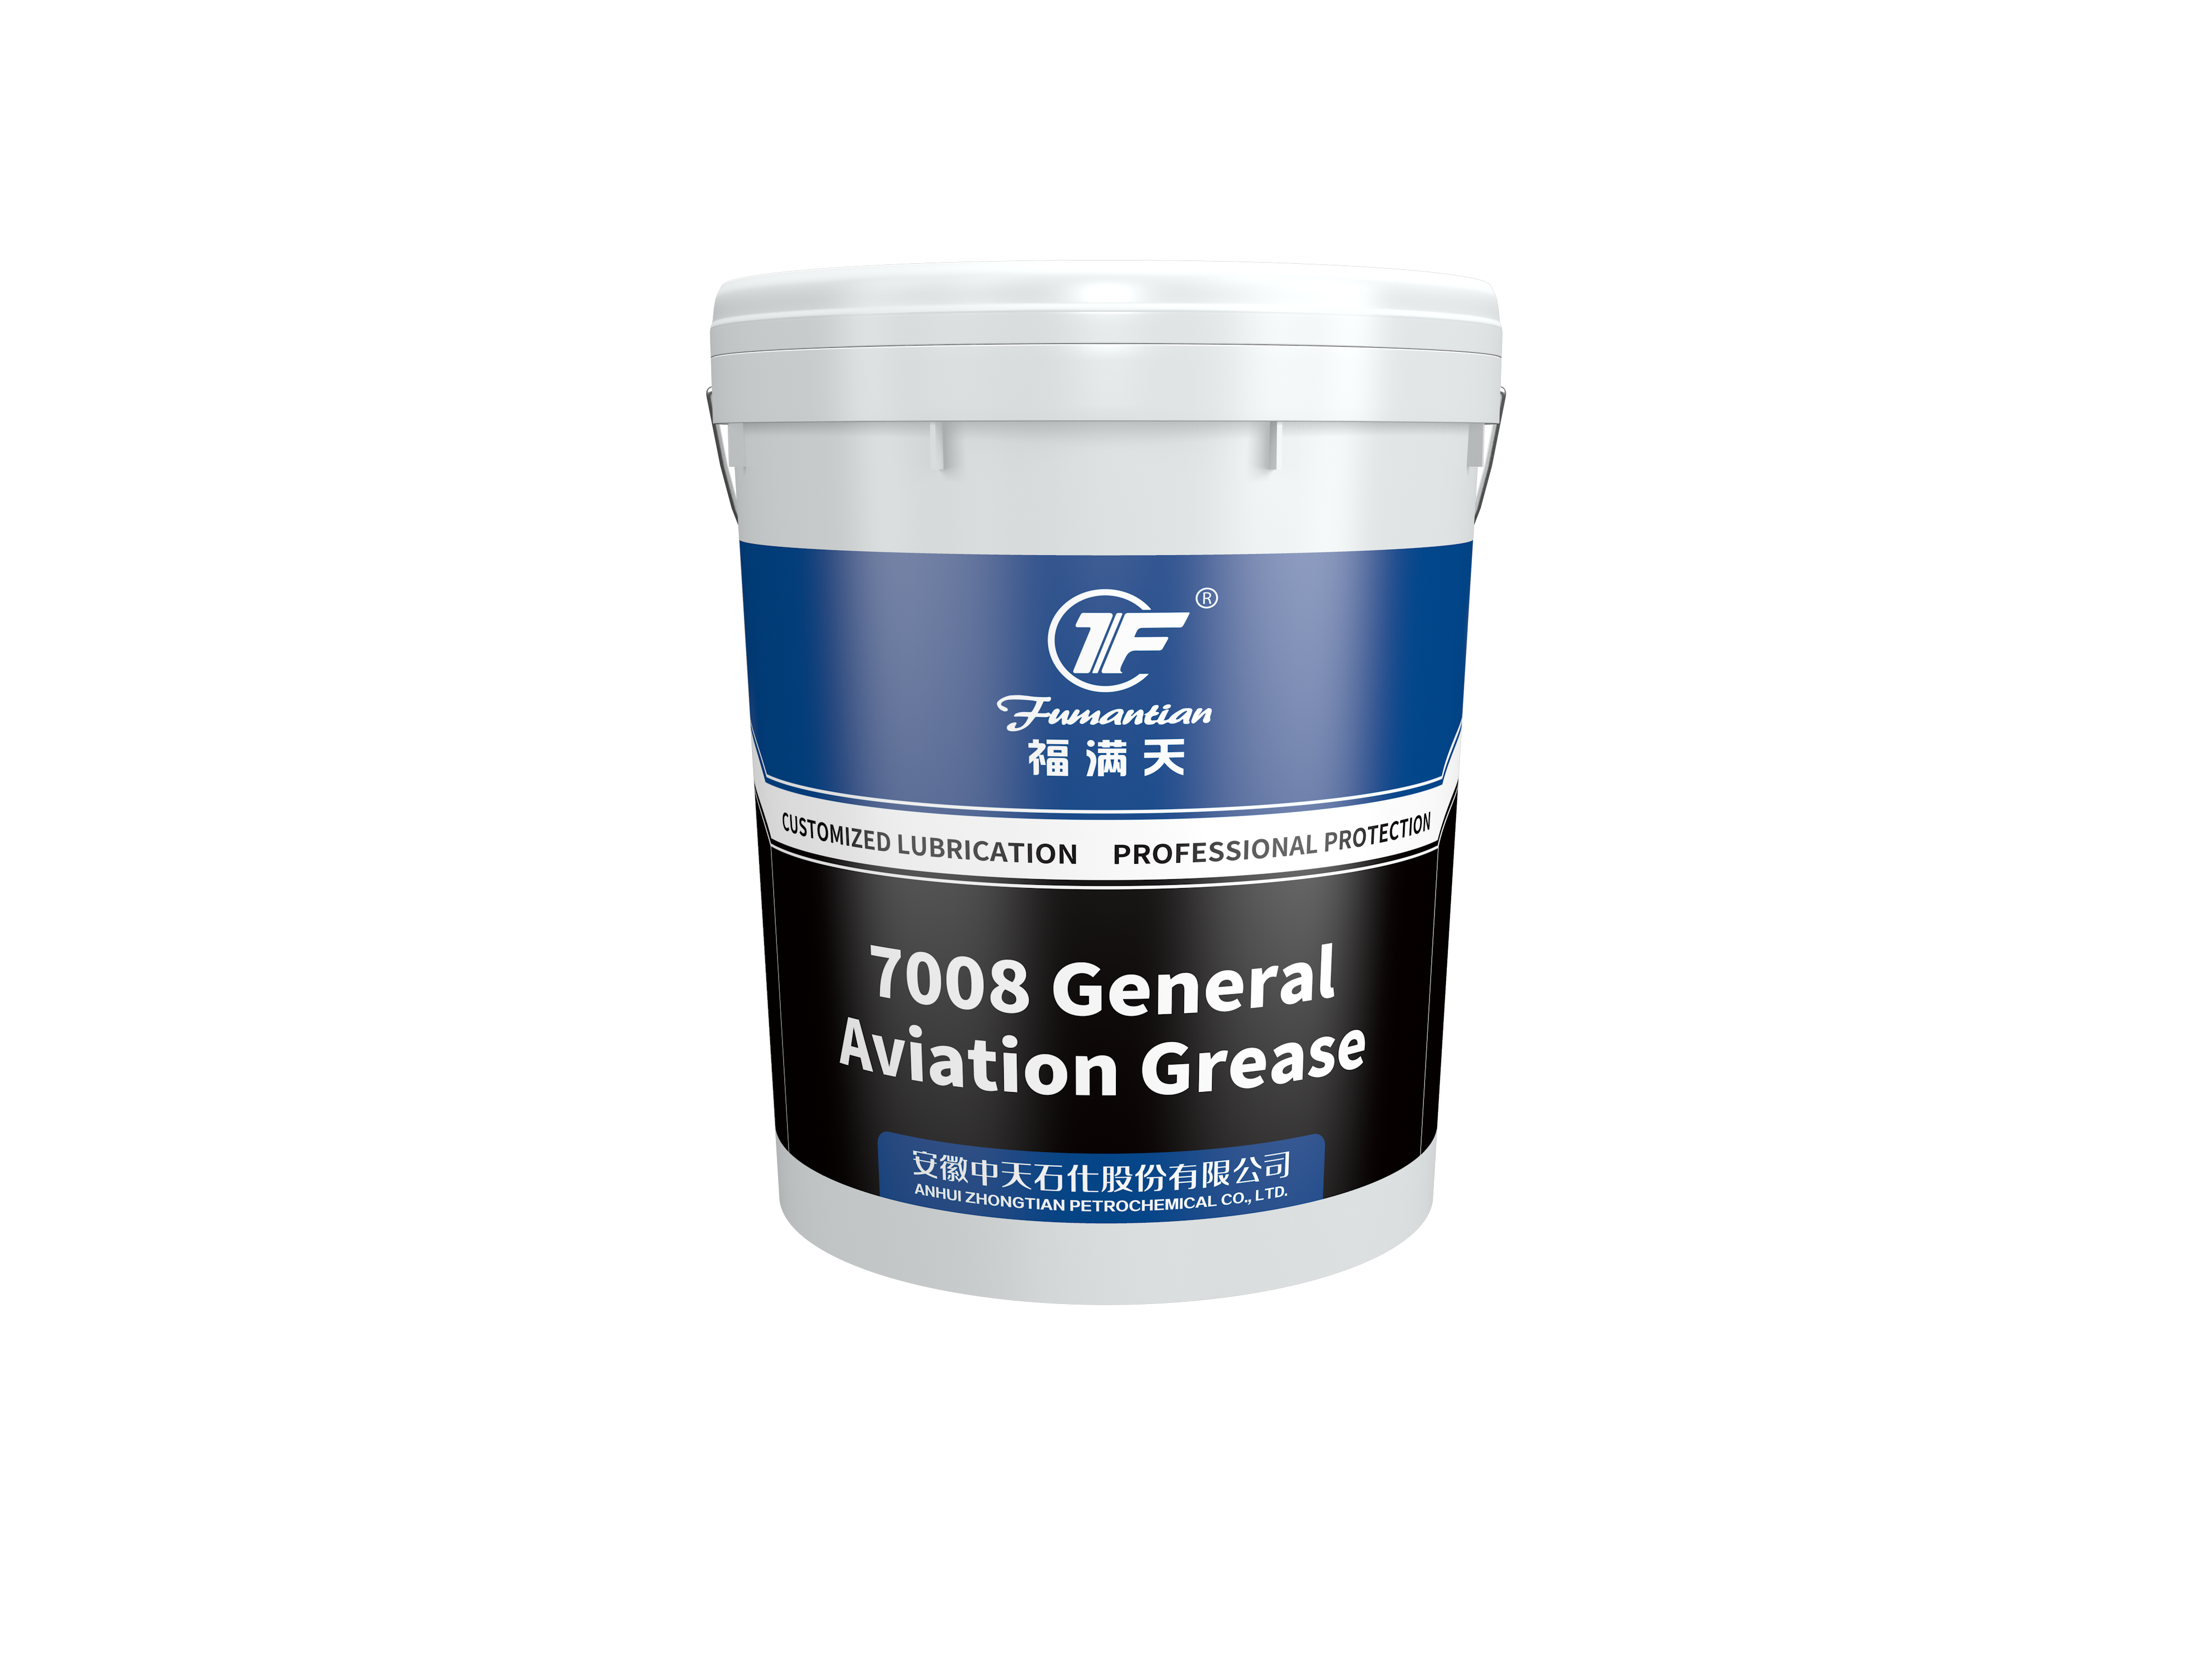 7008 General Aviation Grease